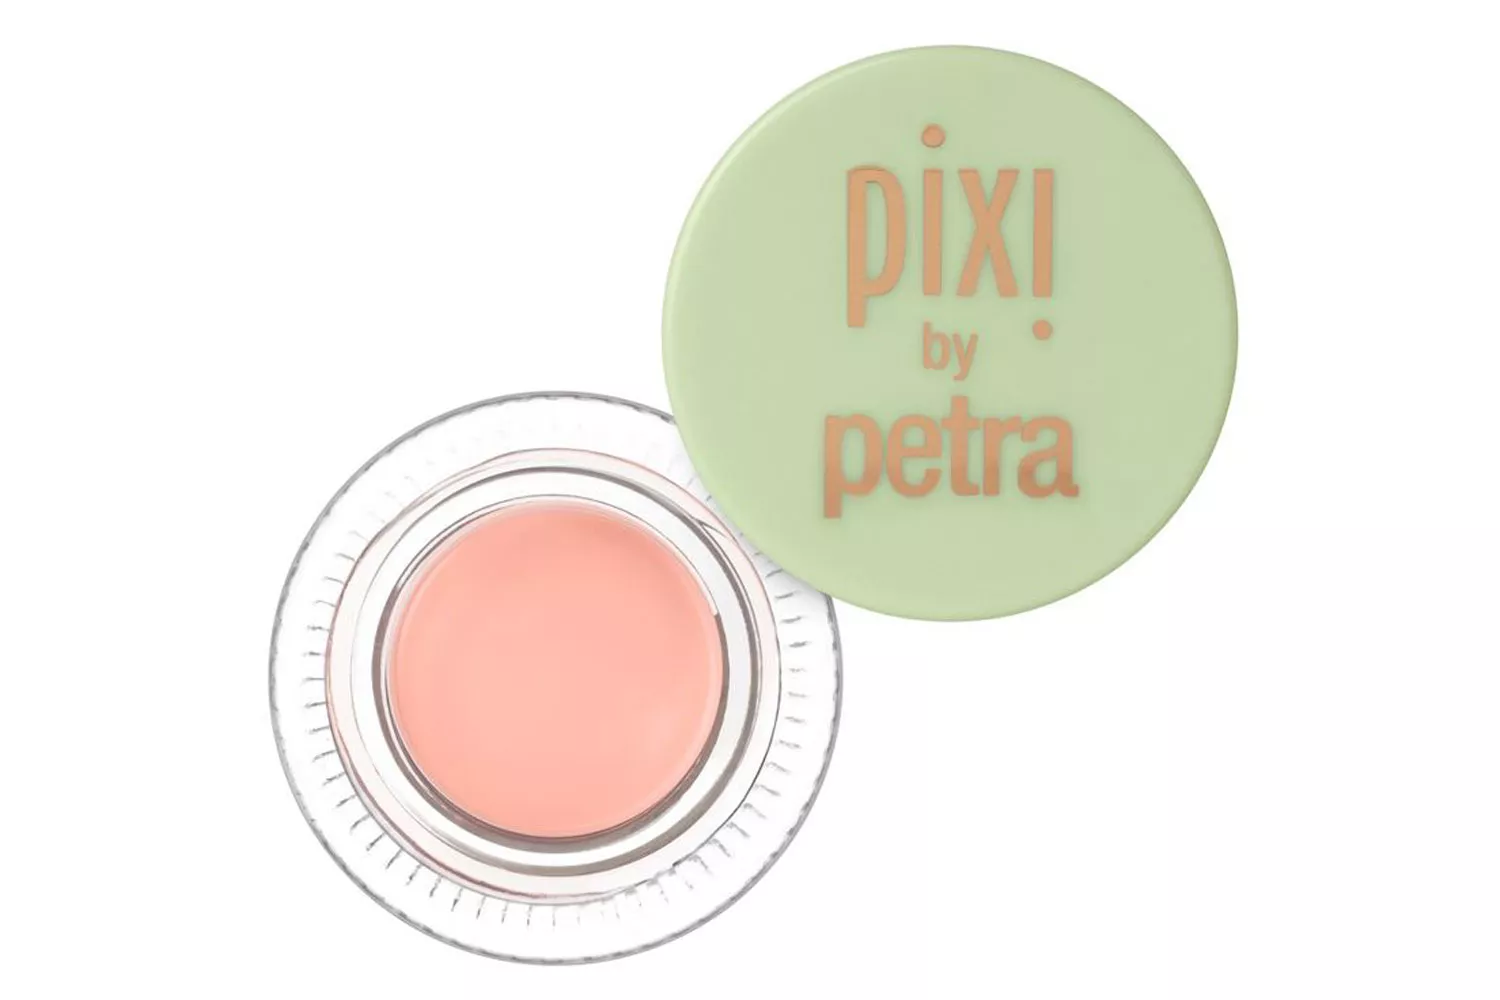 The Best Color Corrector Concealers: Pixi by Petra Correction Concentrate